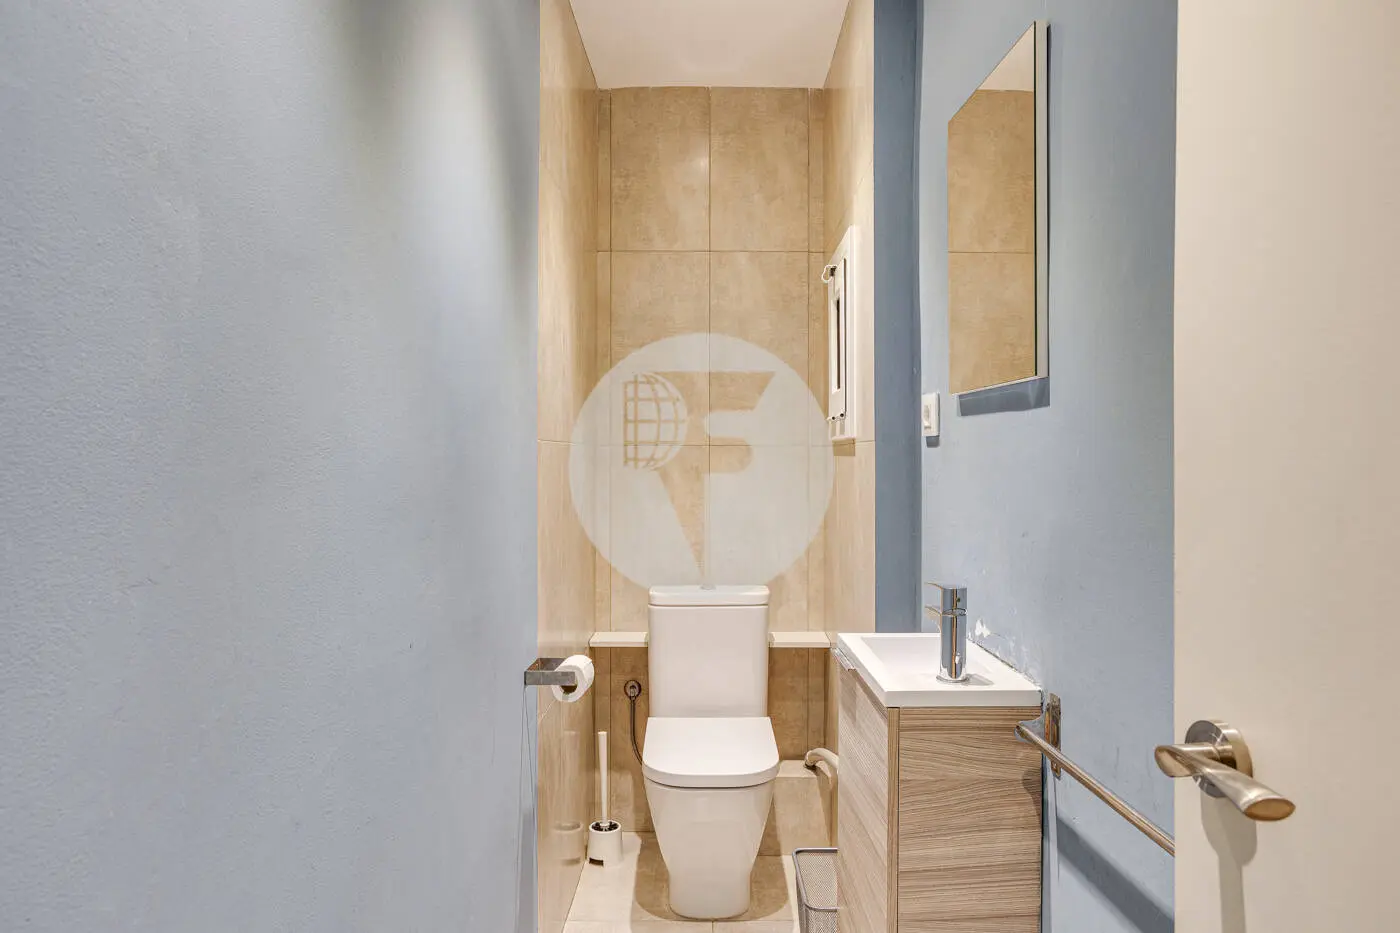 Magnificent apartment for sale next to Pl Universitat of 114m2 according to the land registry, located on Tallers Street in the Ciutat Vella neighborhood of Barcelona 27